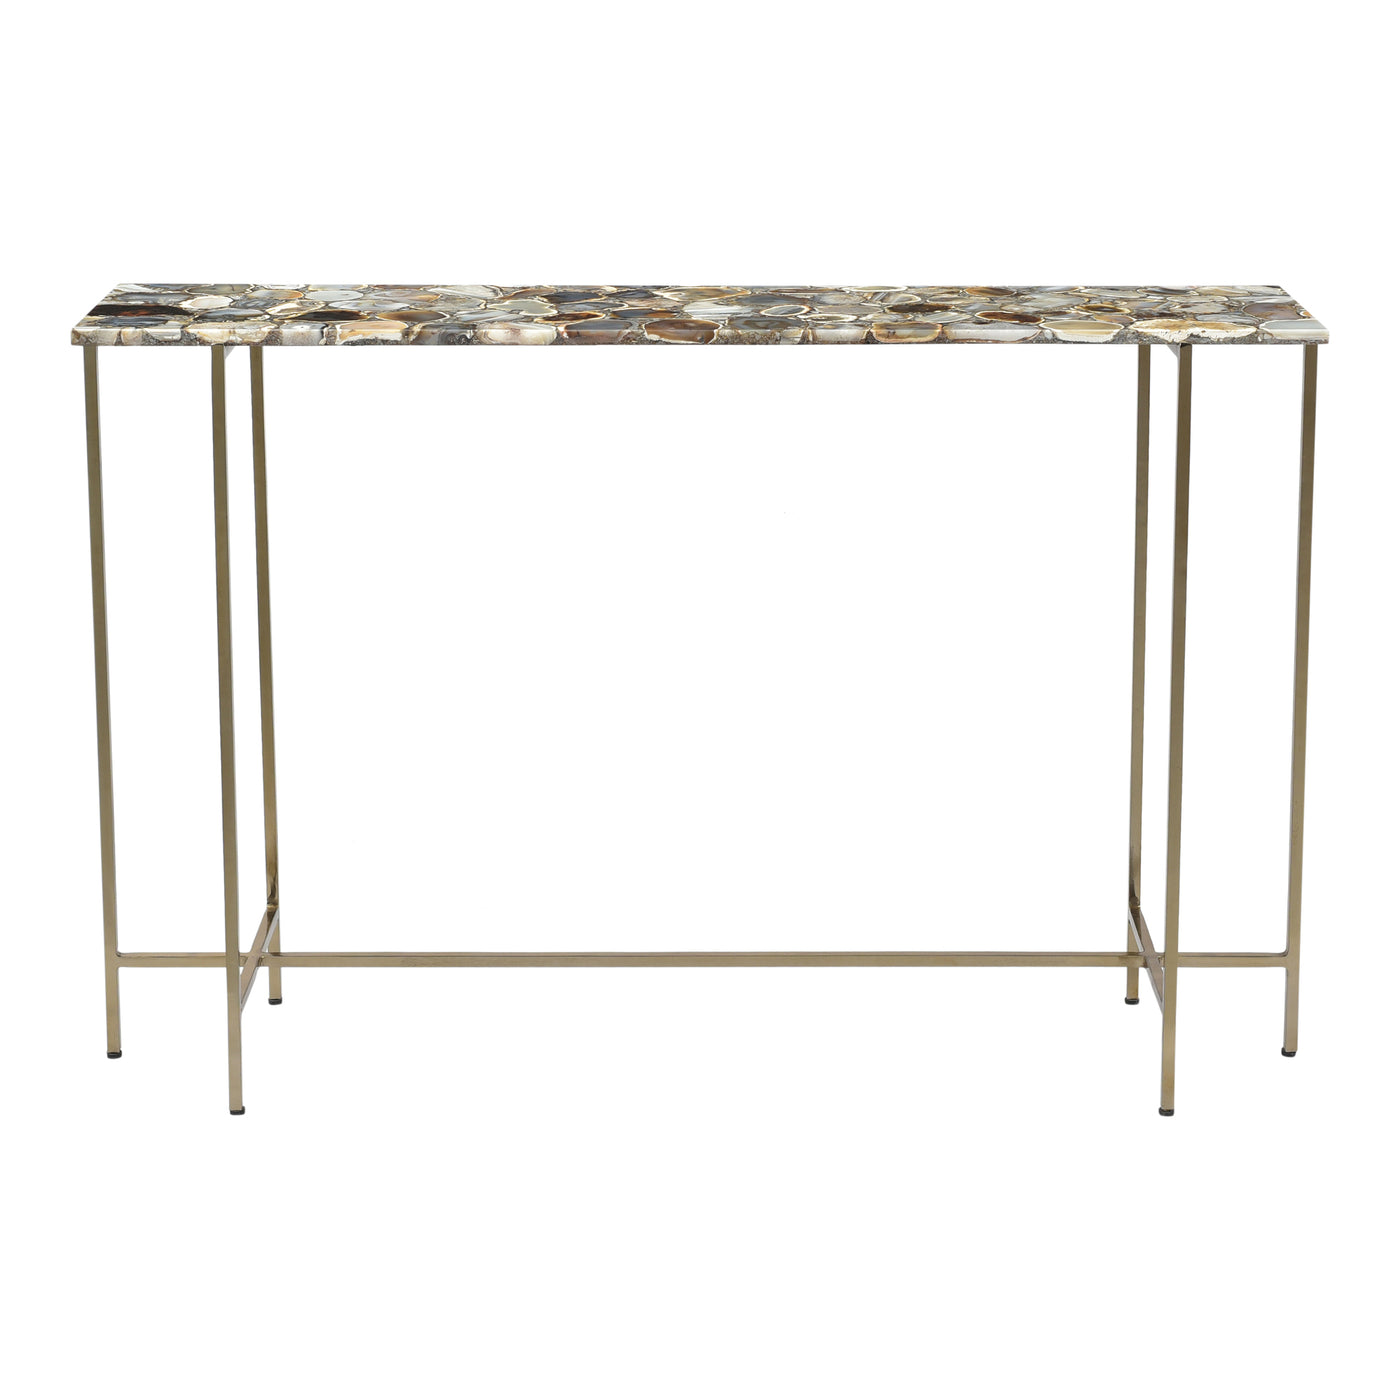 A console table that's worthy of being in a museum. The Agate Console Table's clear-cut agate tabletop reveals earthy tone...